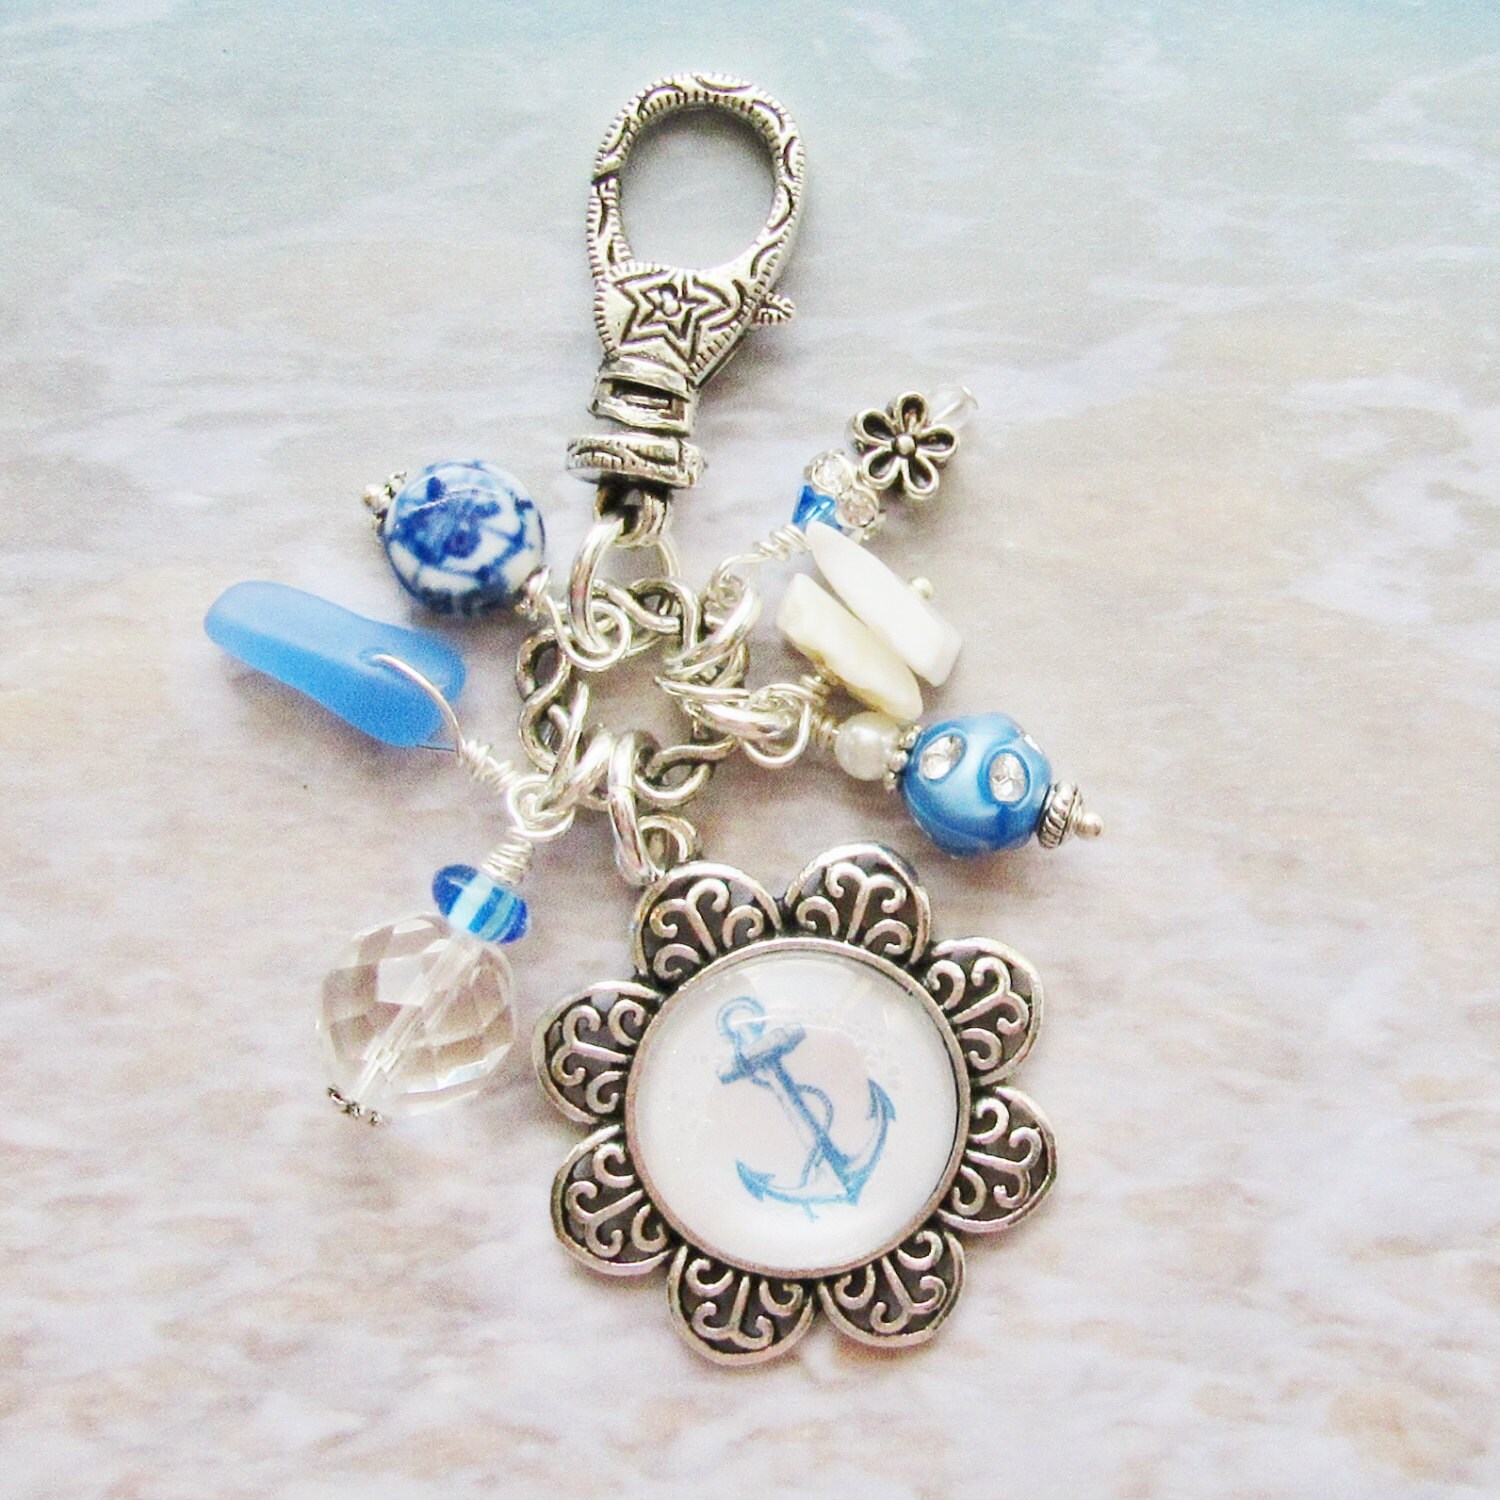 Anchor Zipper Pull Charm; Nautical Charm Clip On Purse, Boot, Bag or  Backpack Charm Key Chain,Boat Lover Gift Idea,Zipper Pull, Perfect for  Necklaces